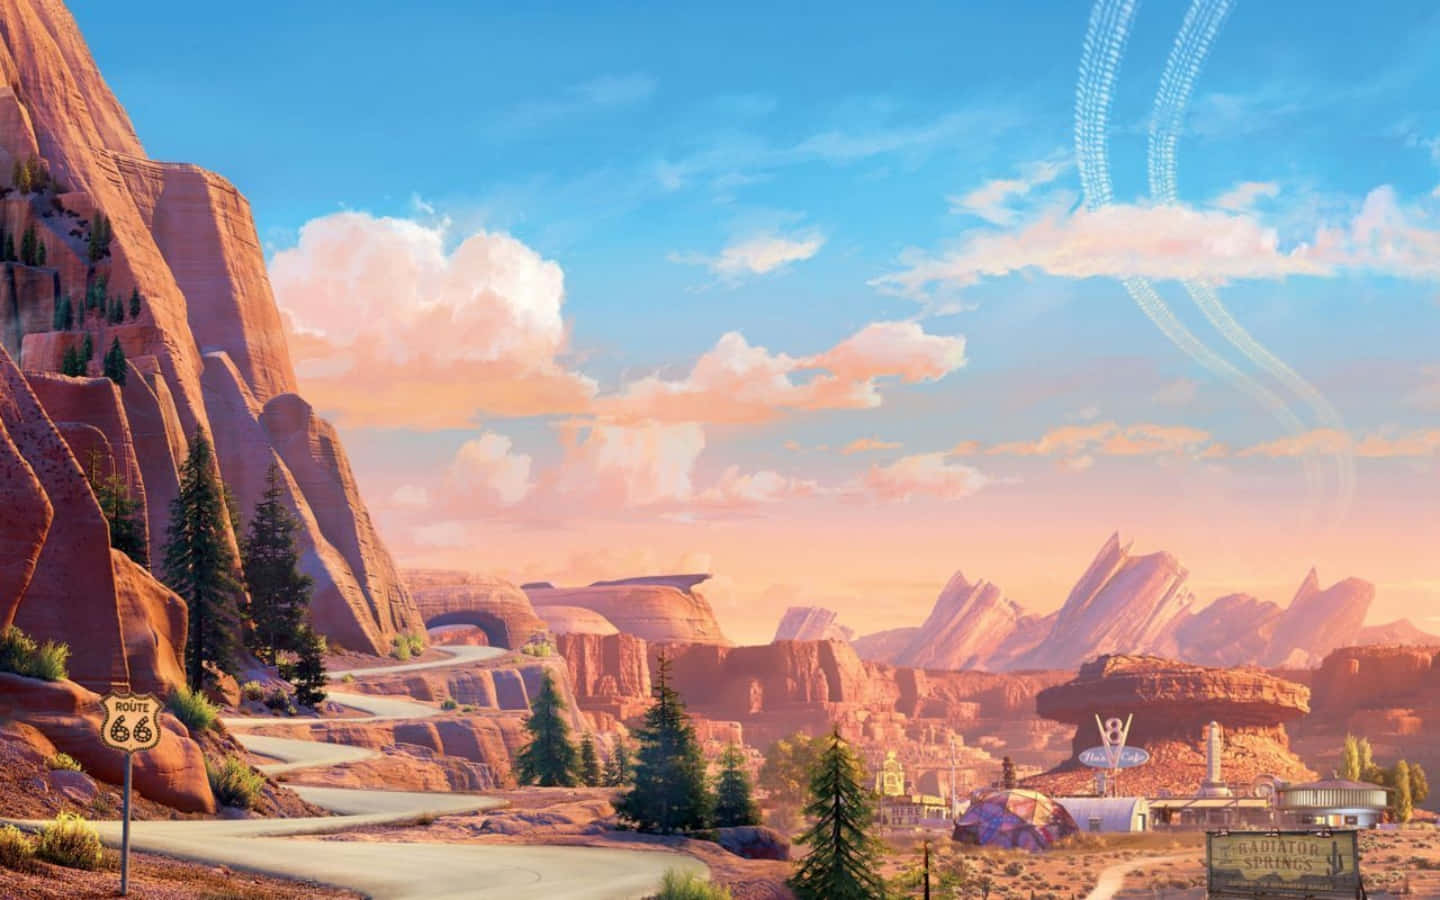 Welcome To Radiator Springs, The Heart of Route 66 Wallpaper